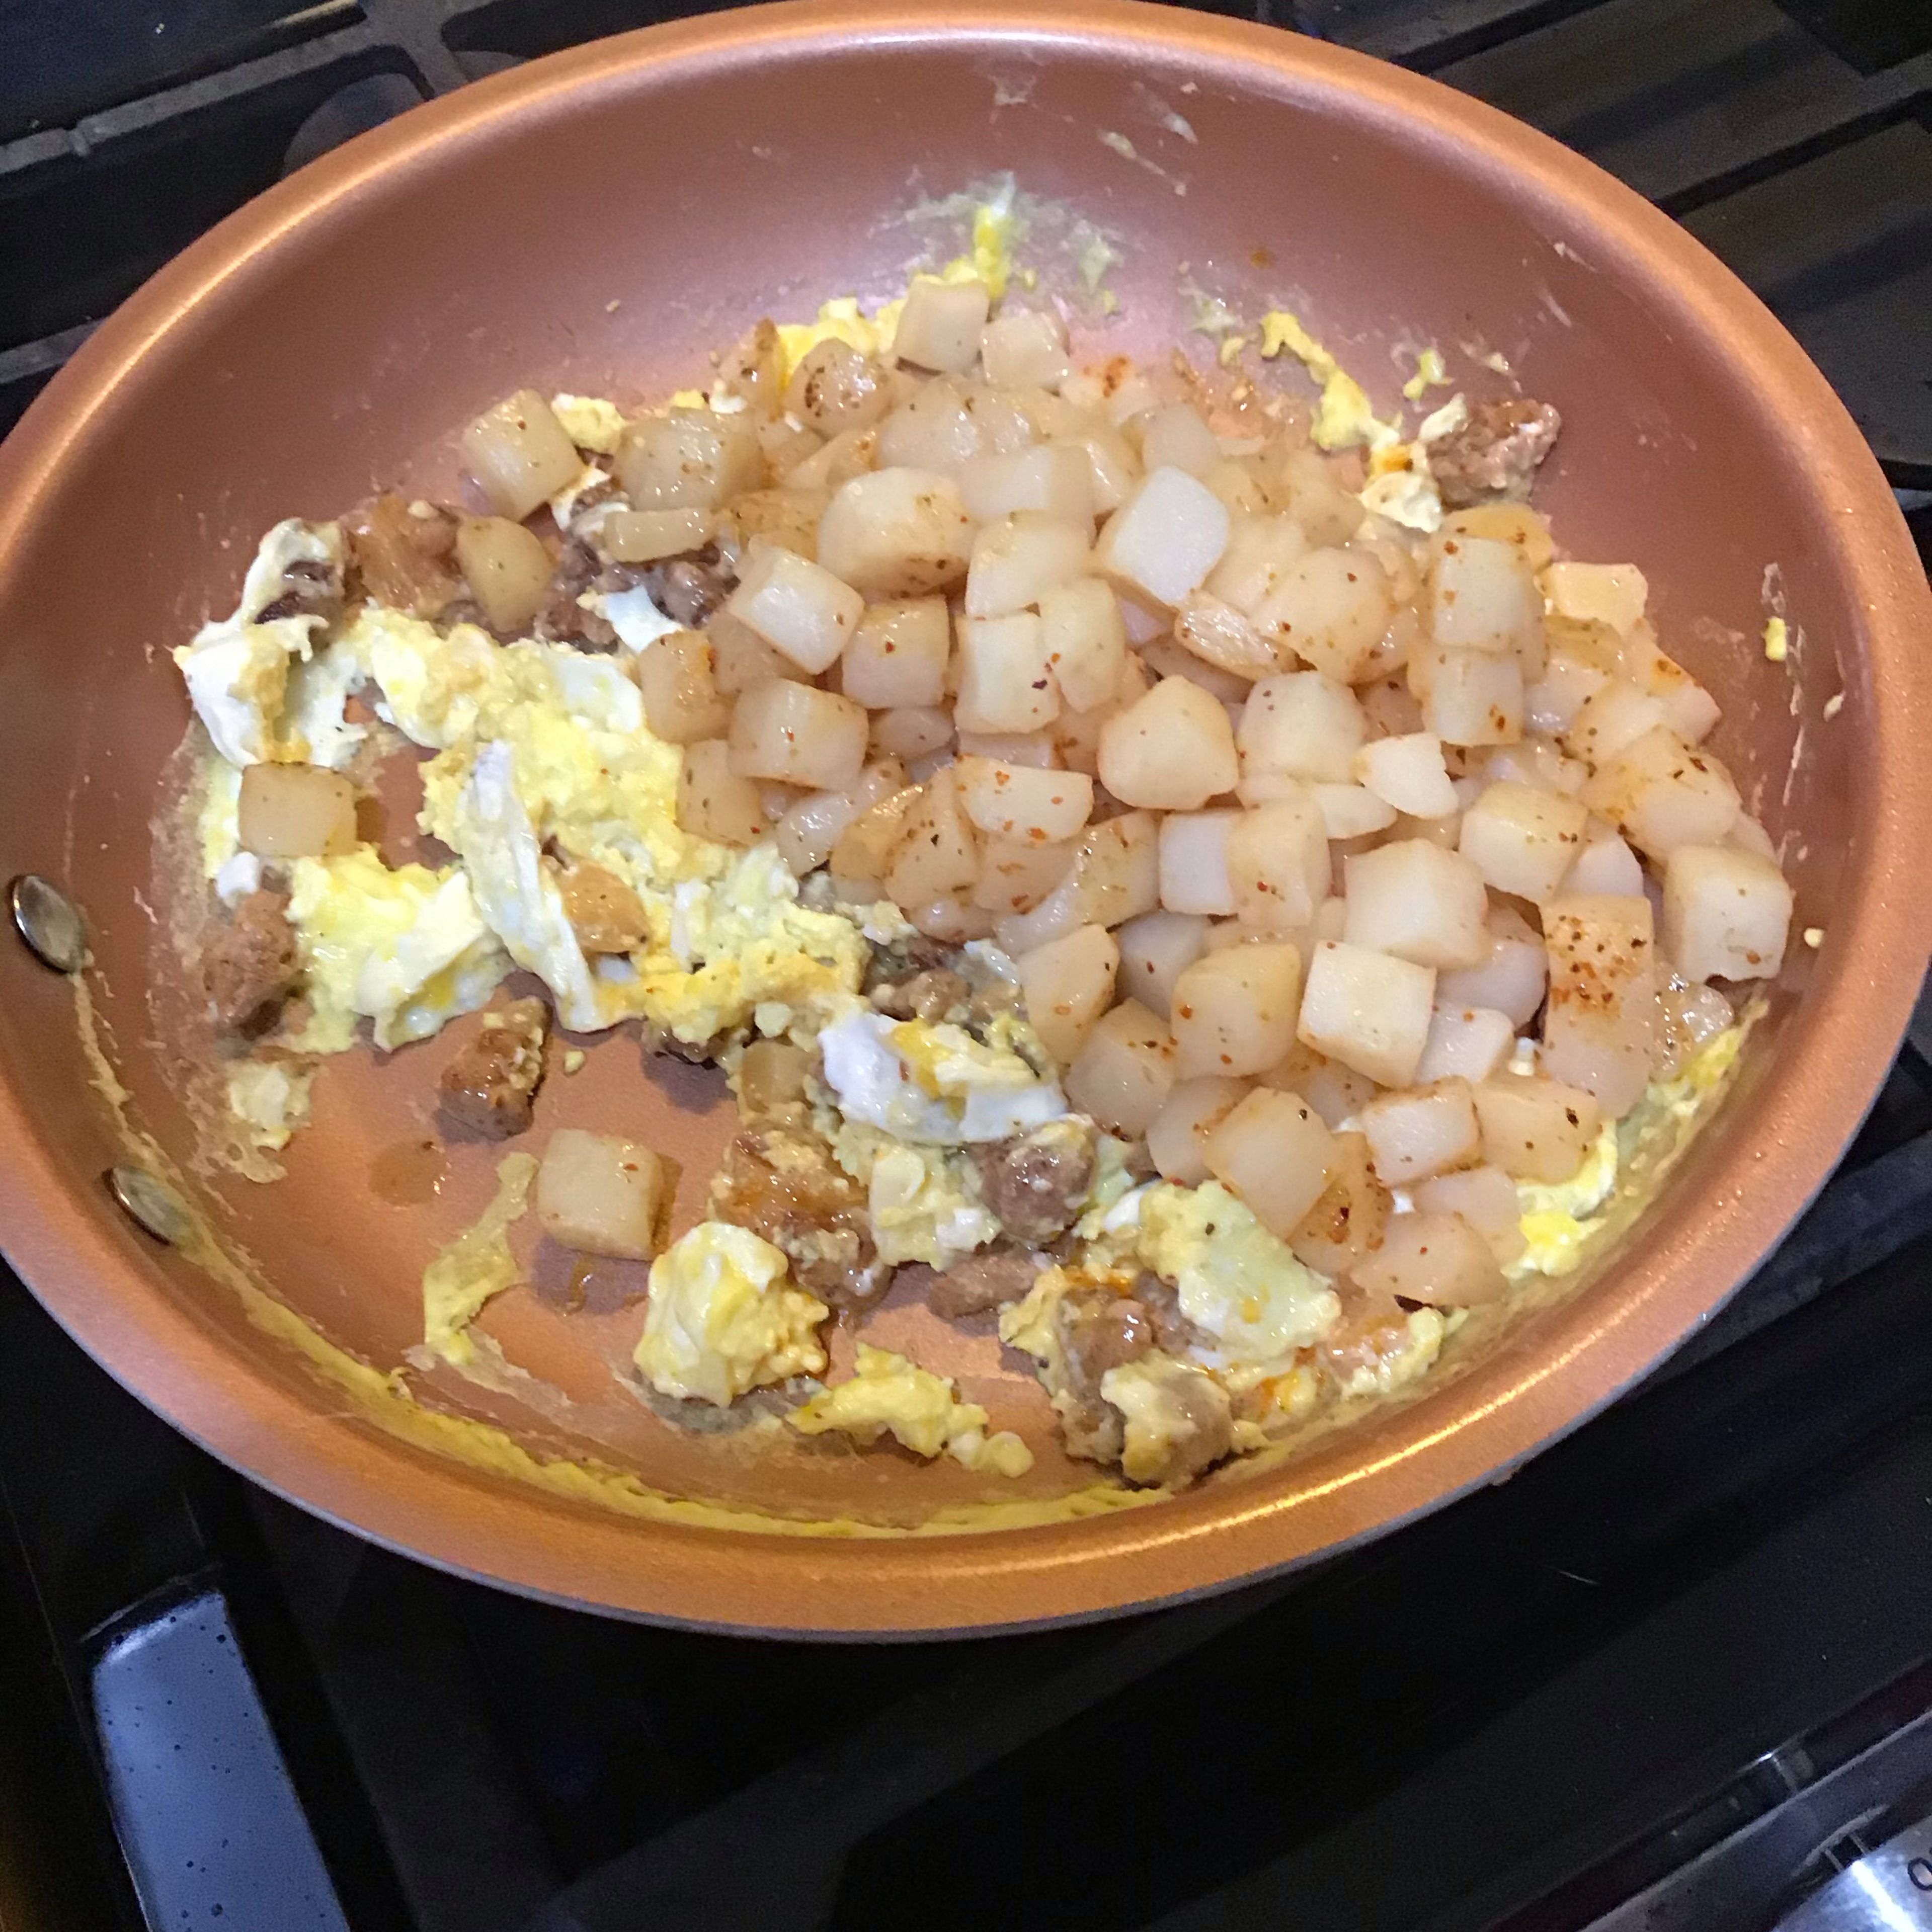 Add potatoes to larger frying pan with the eggs 